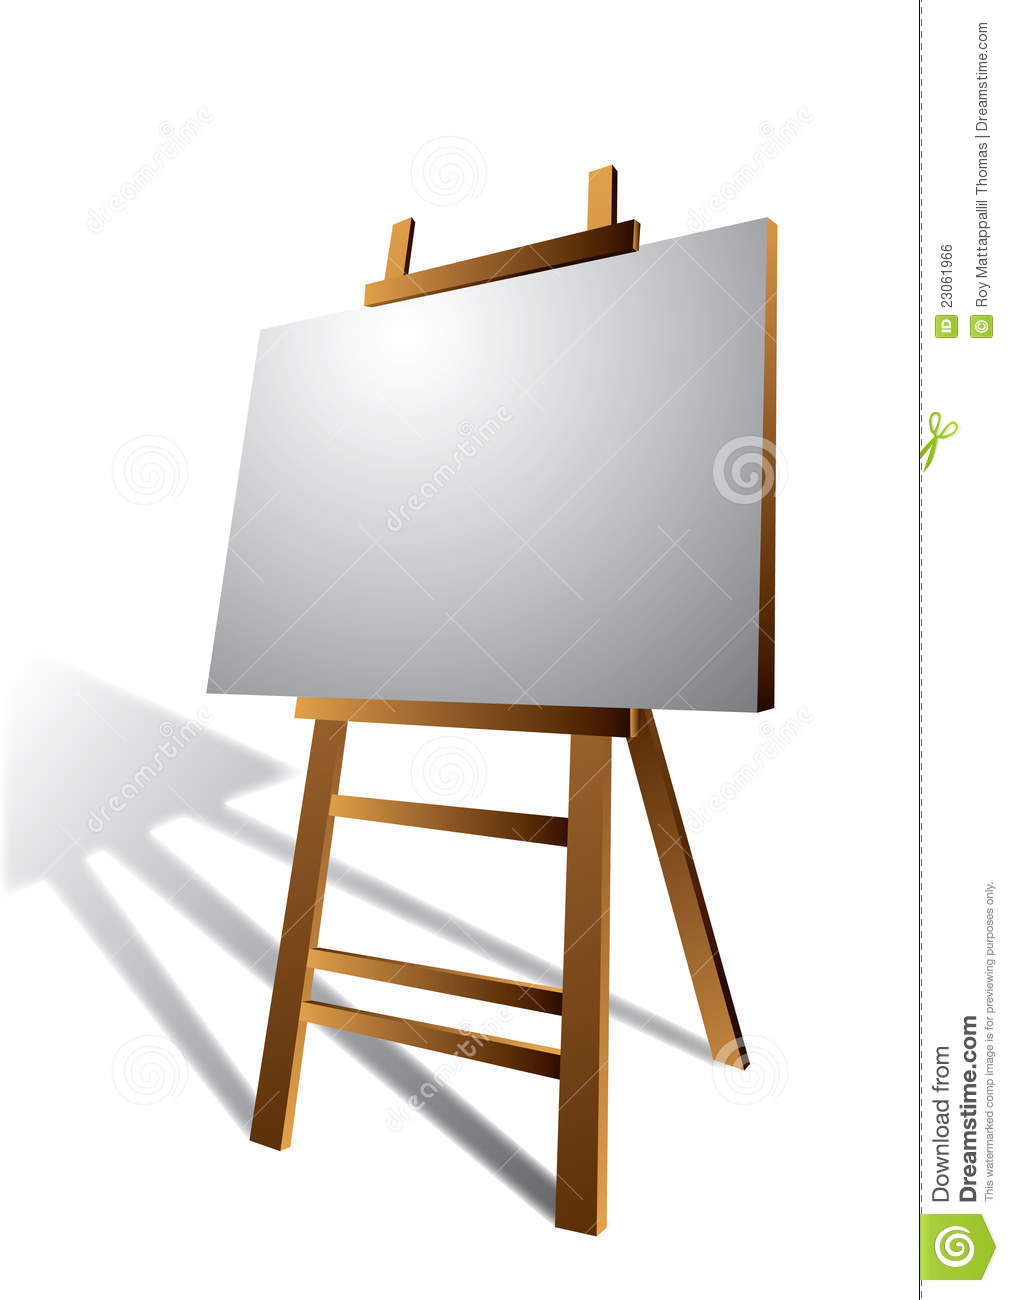 Canvas On Wooden Art Easel Royalty Free Stock Image   Image  23061966